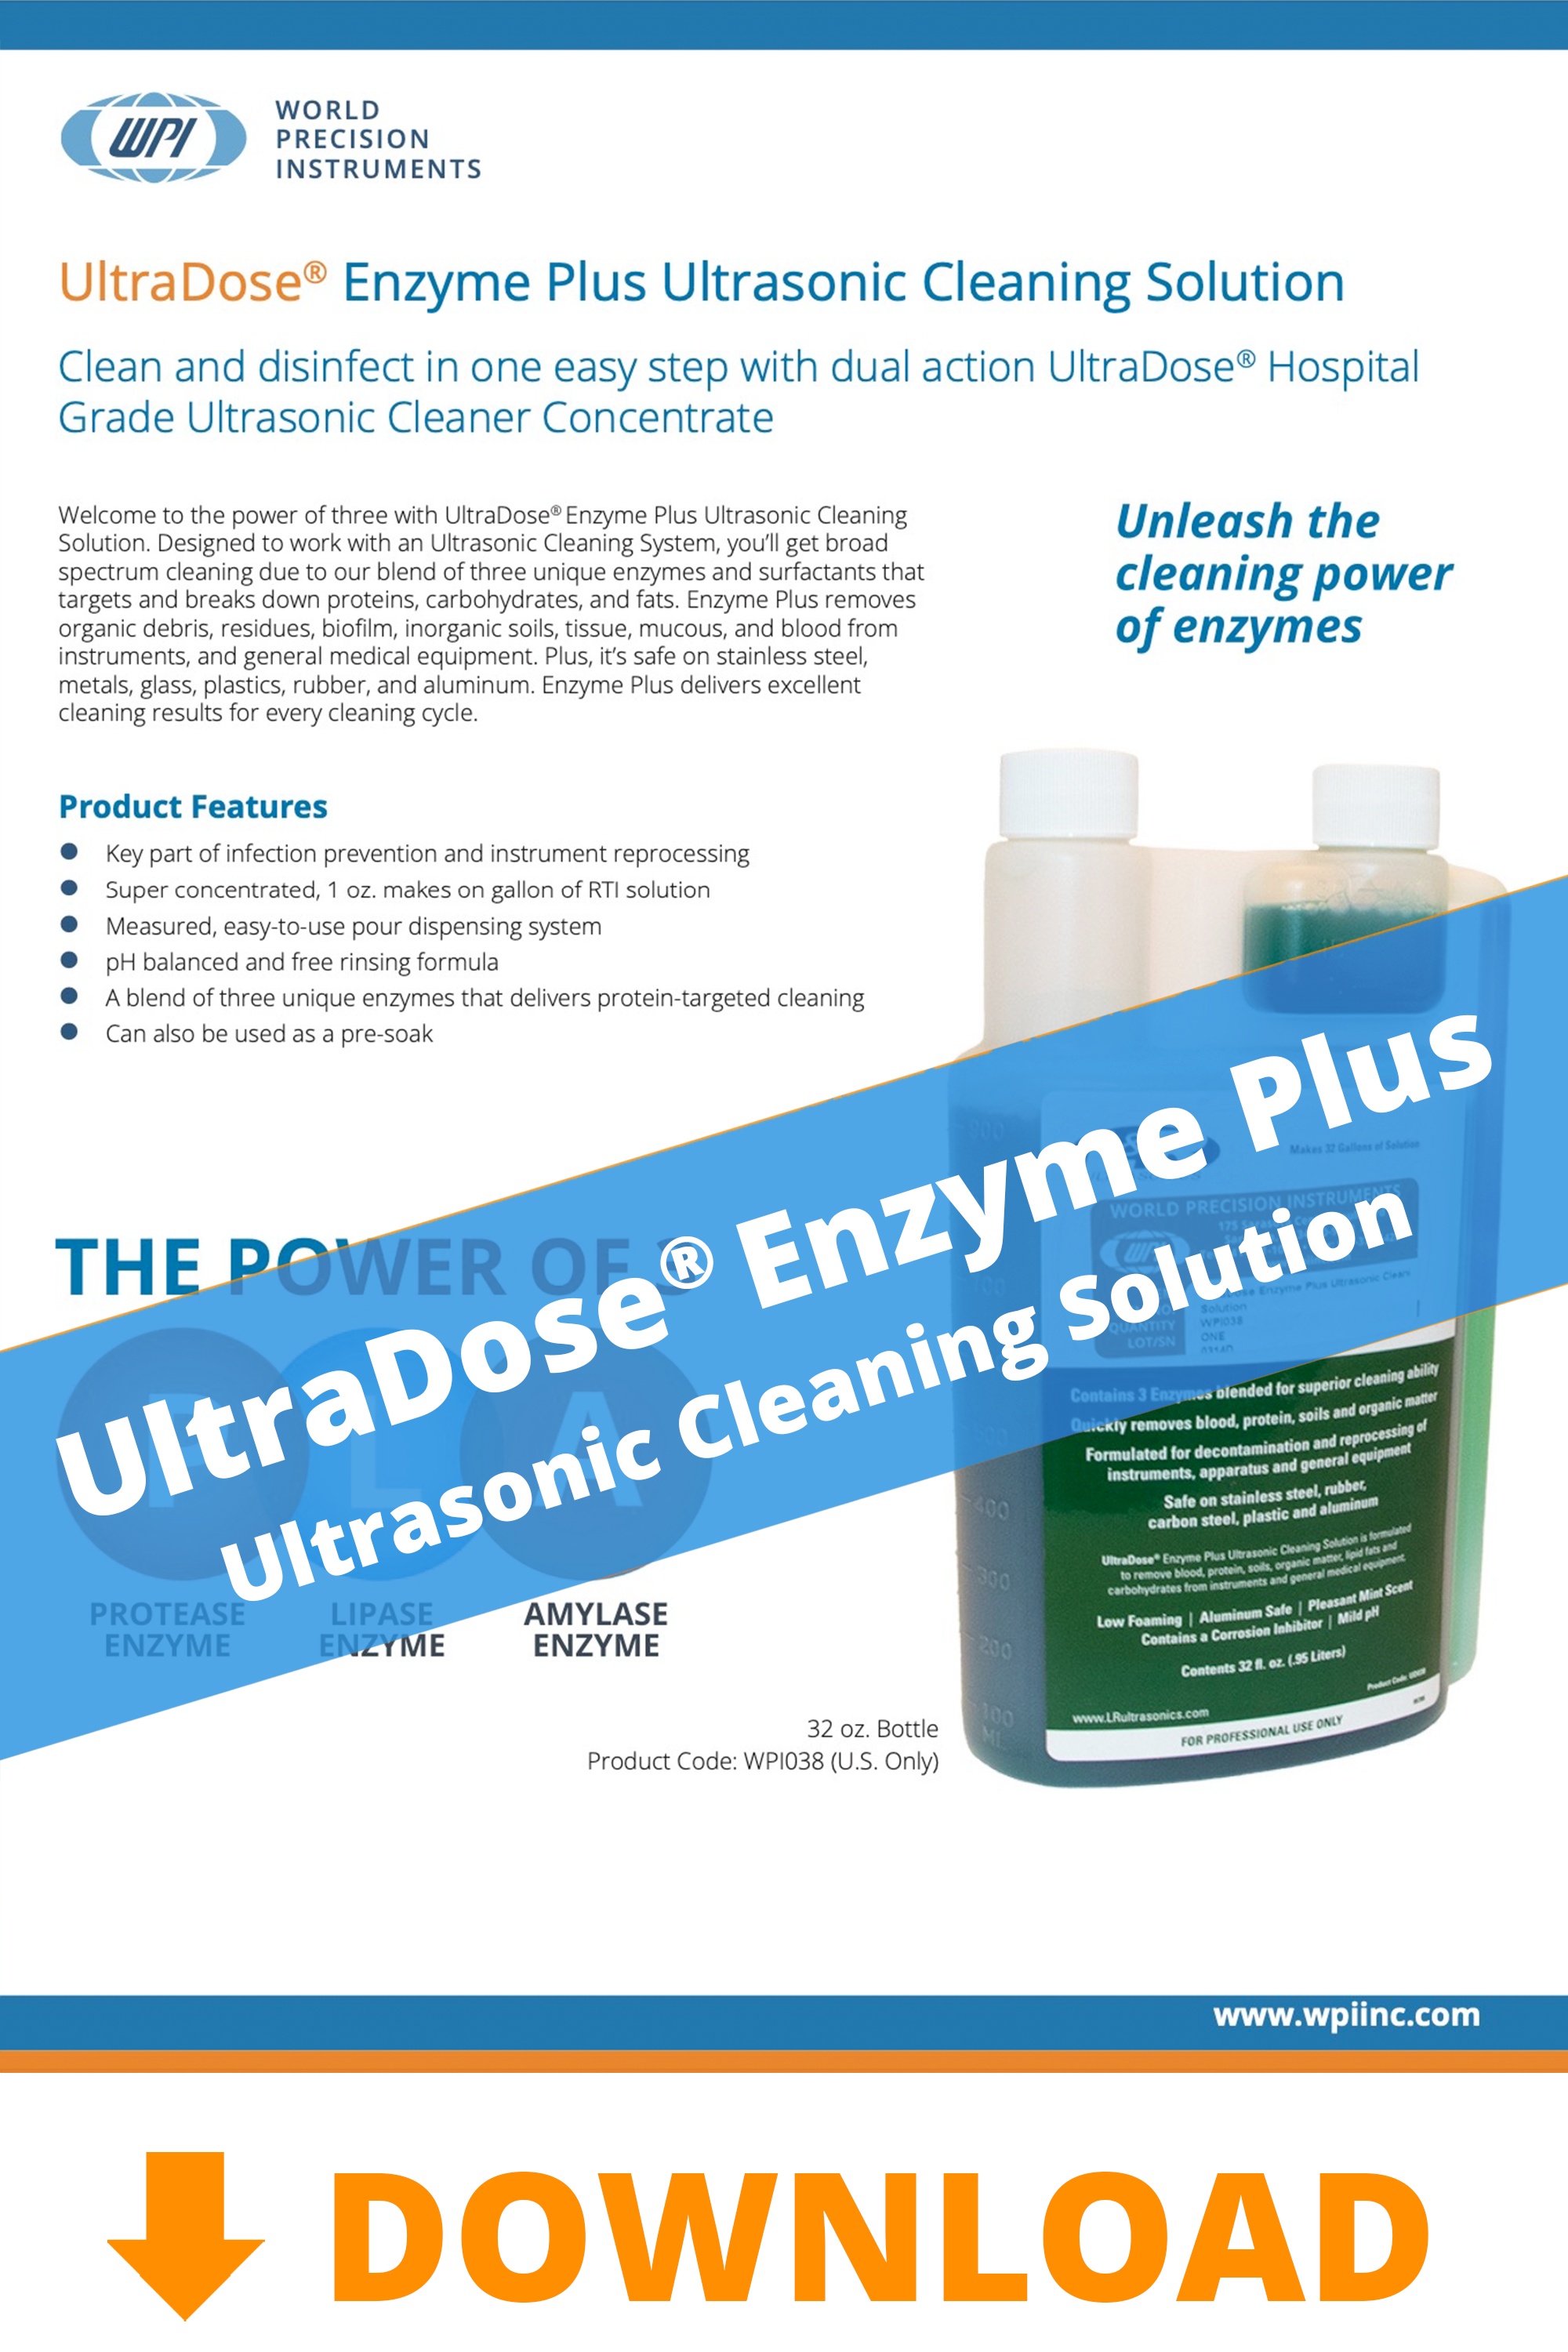 Ultradose Enzyme Cleaning Solution